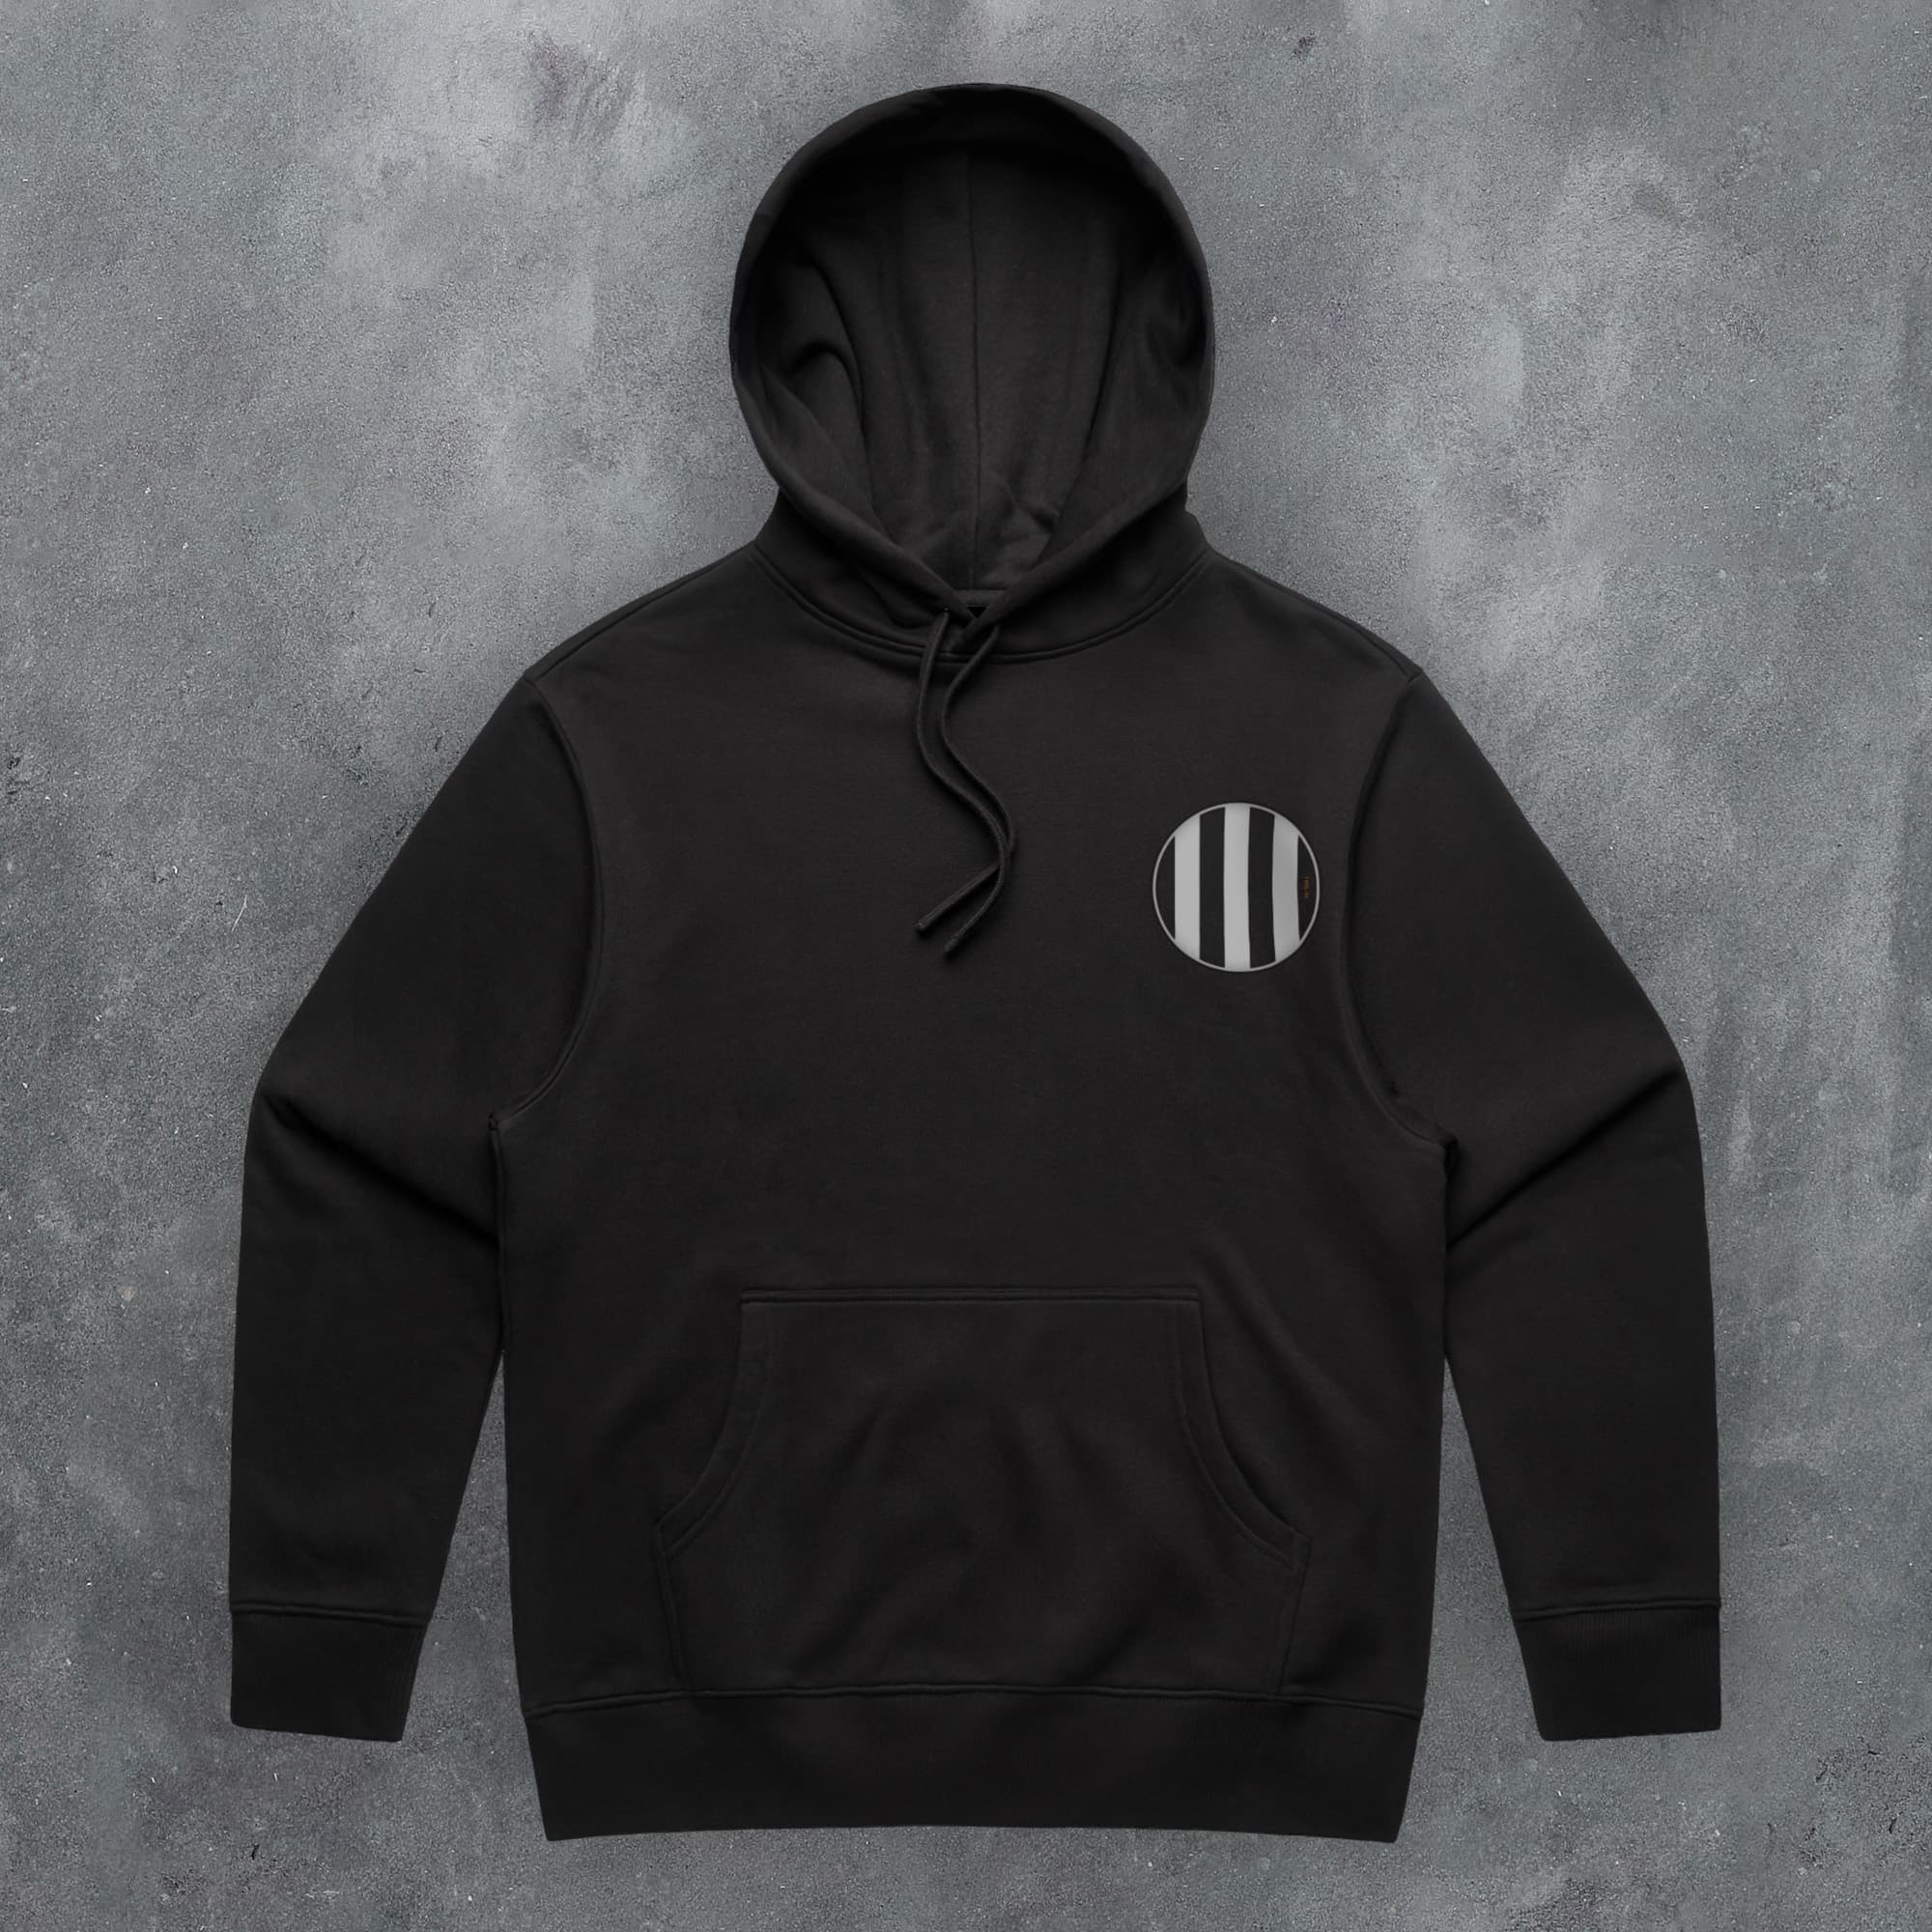 a black hoodie with a white stripe on the chest